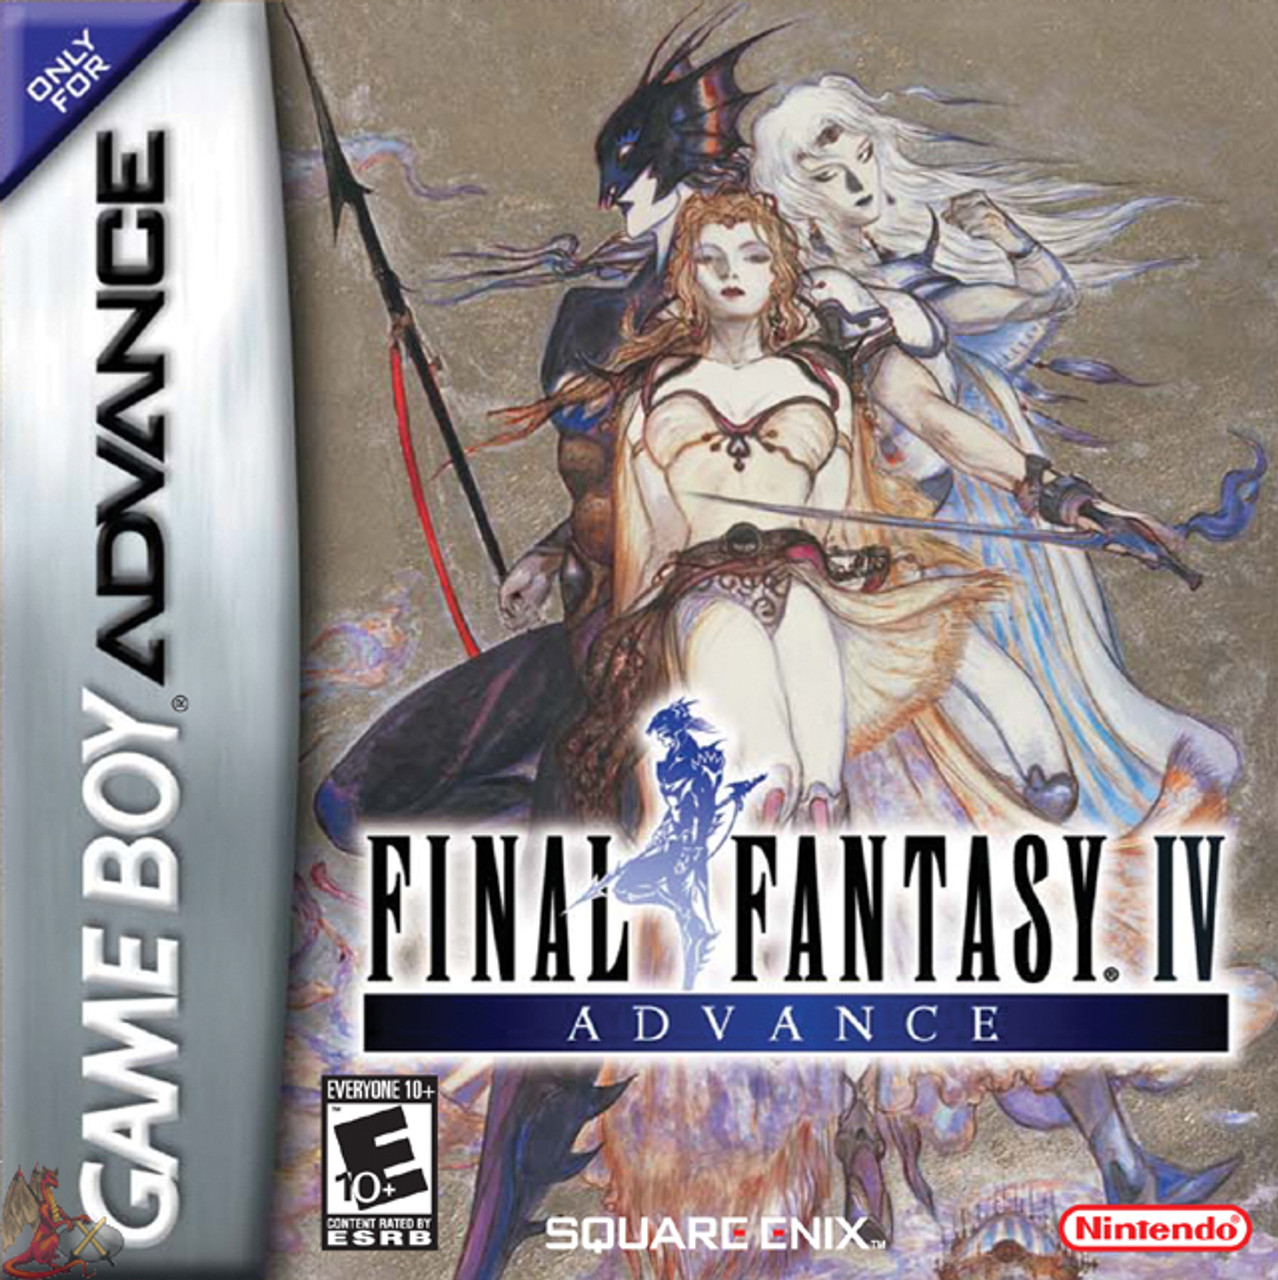 Square Enix Give Final Fantasy IV: Complete Collection The Special